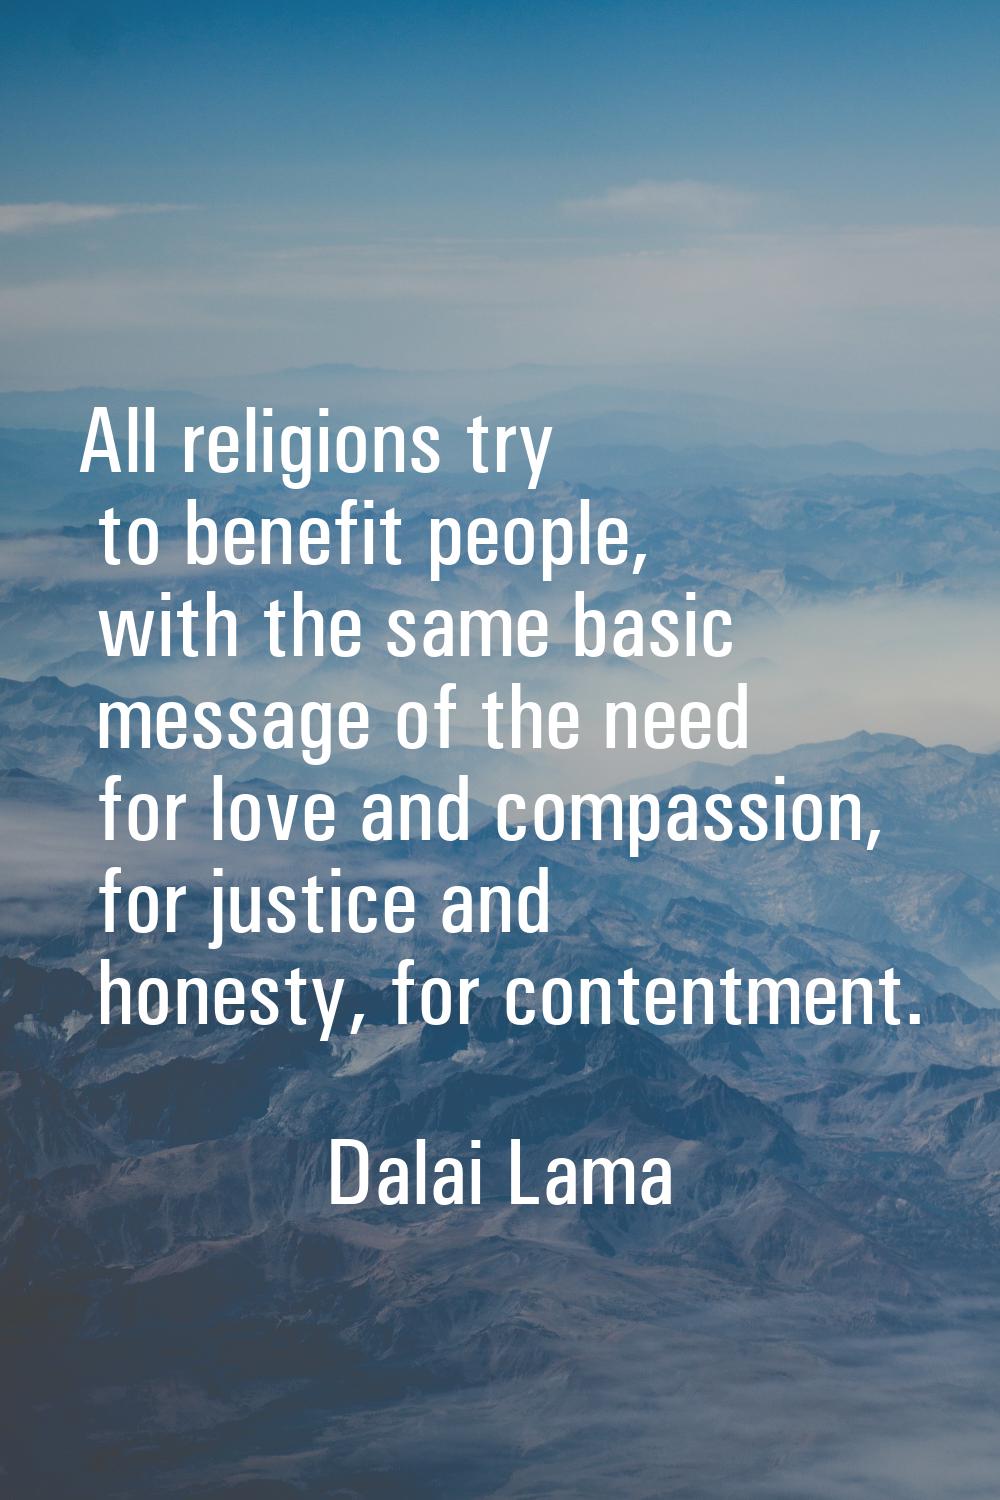 All religions try to benefit people, with the same basic message of the need for love and compassio